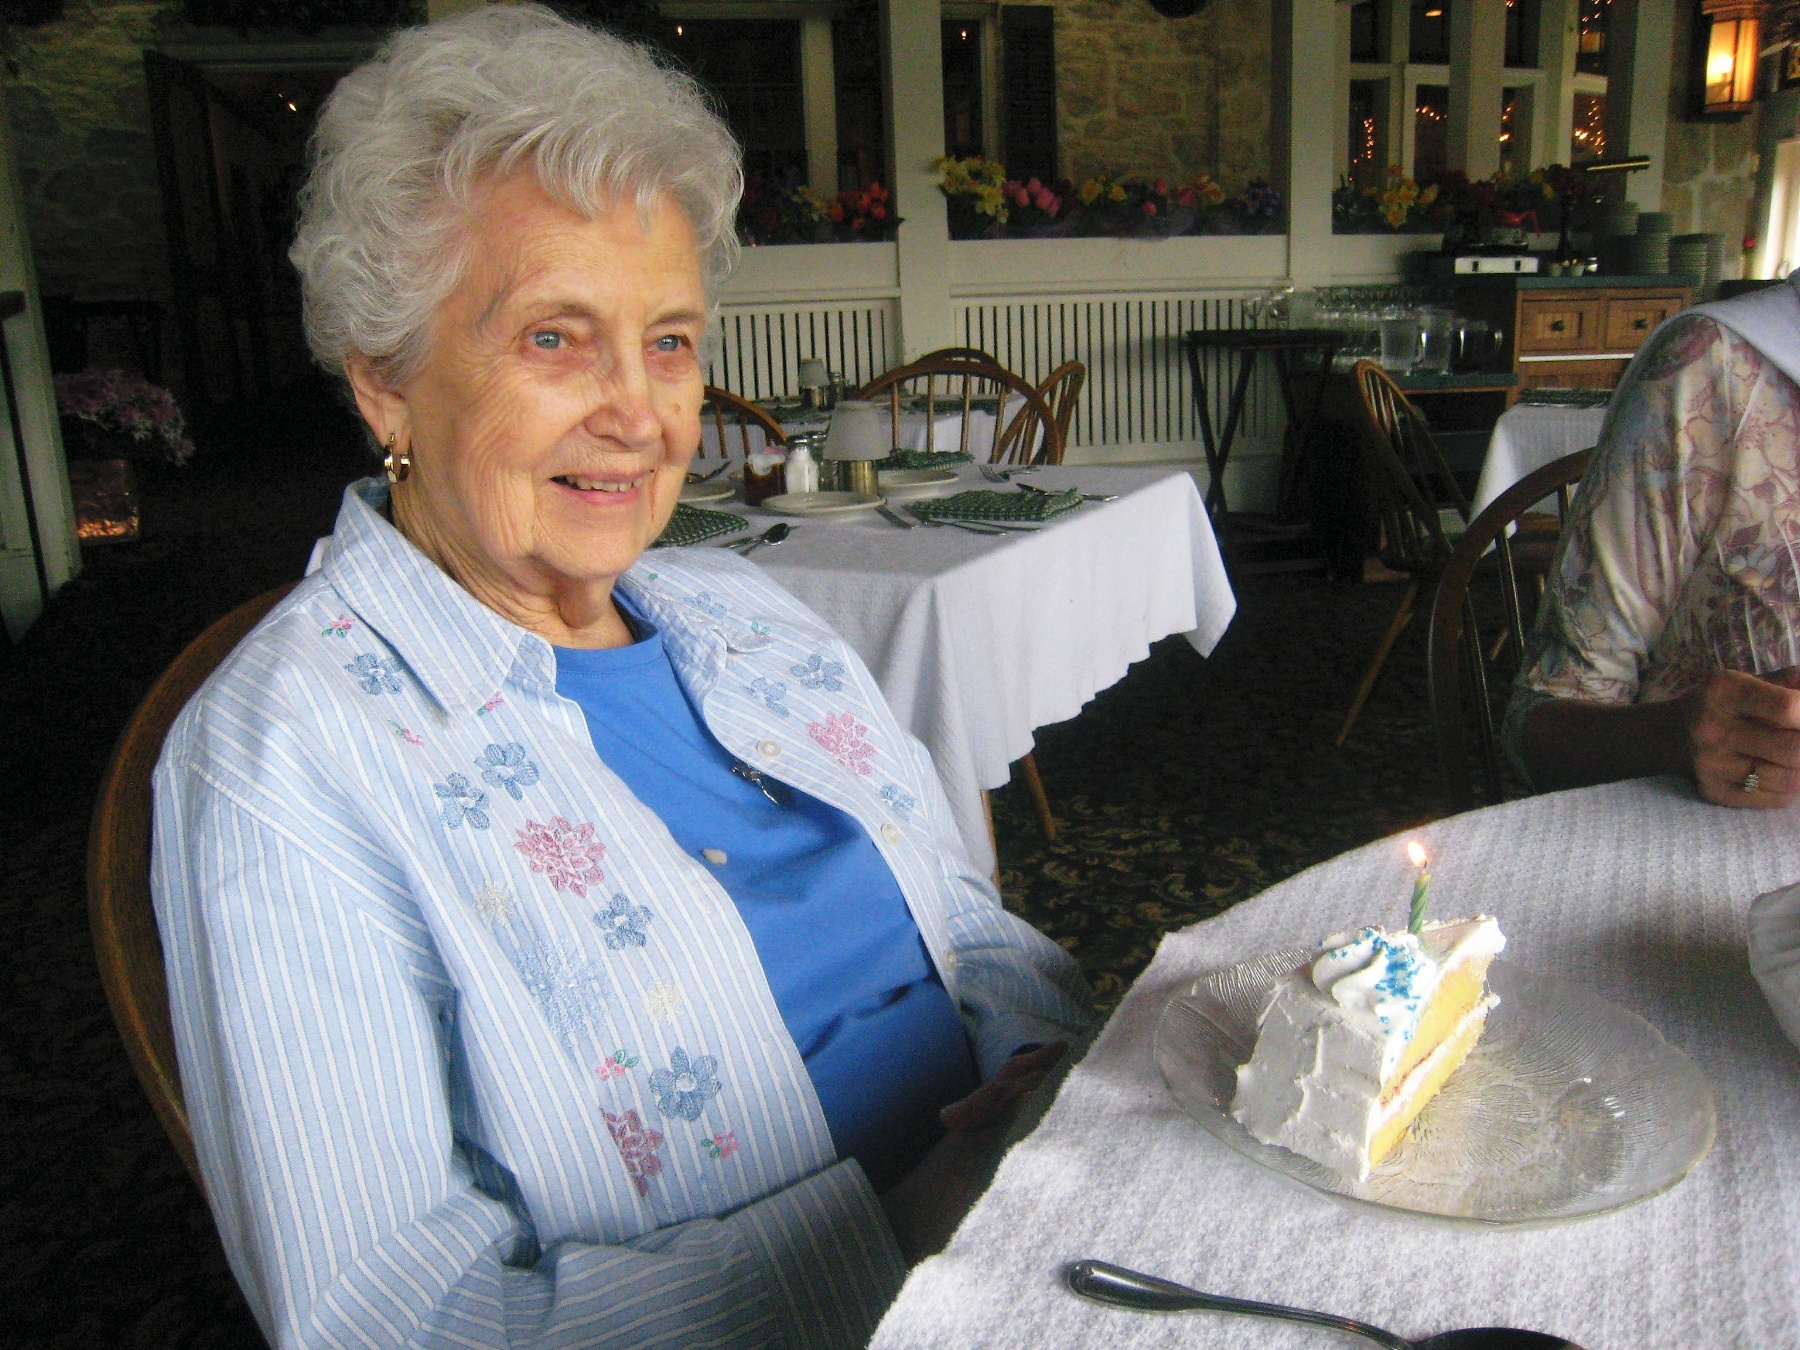 Flo, and her birthday cake – she turned 93 last April.